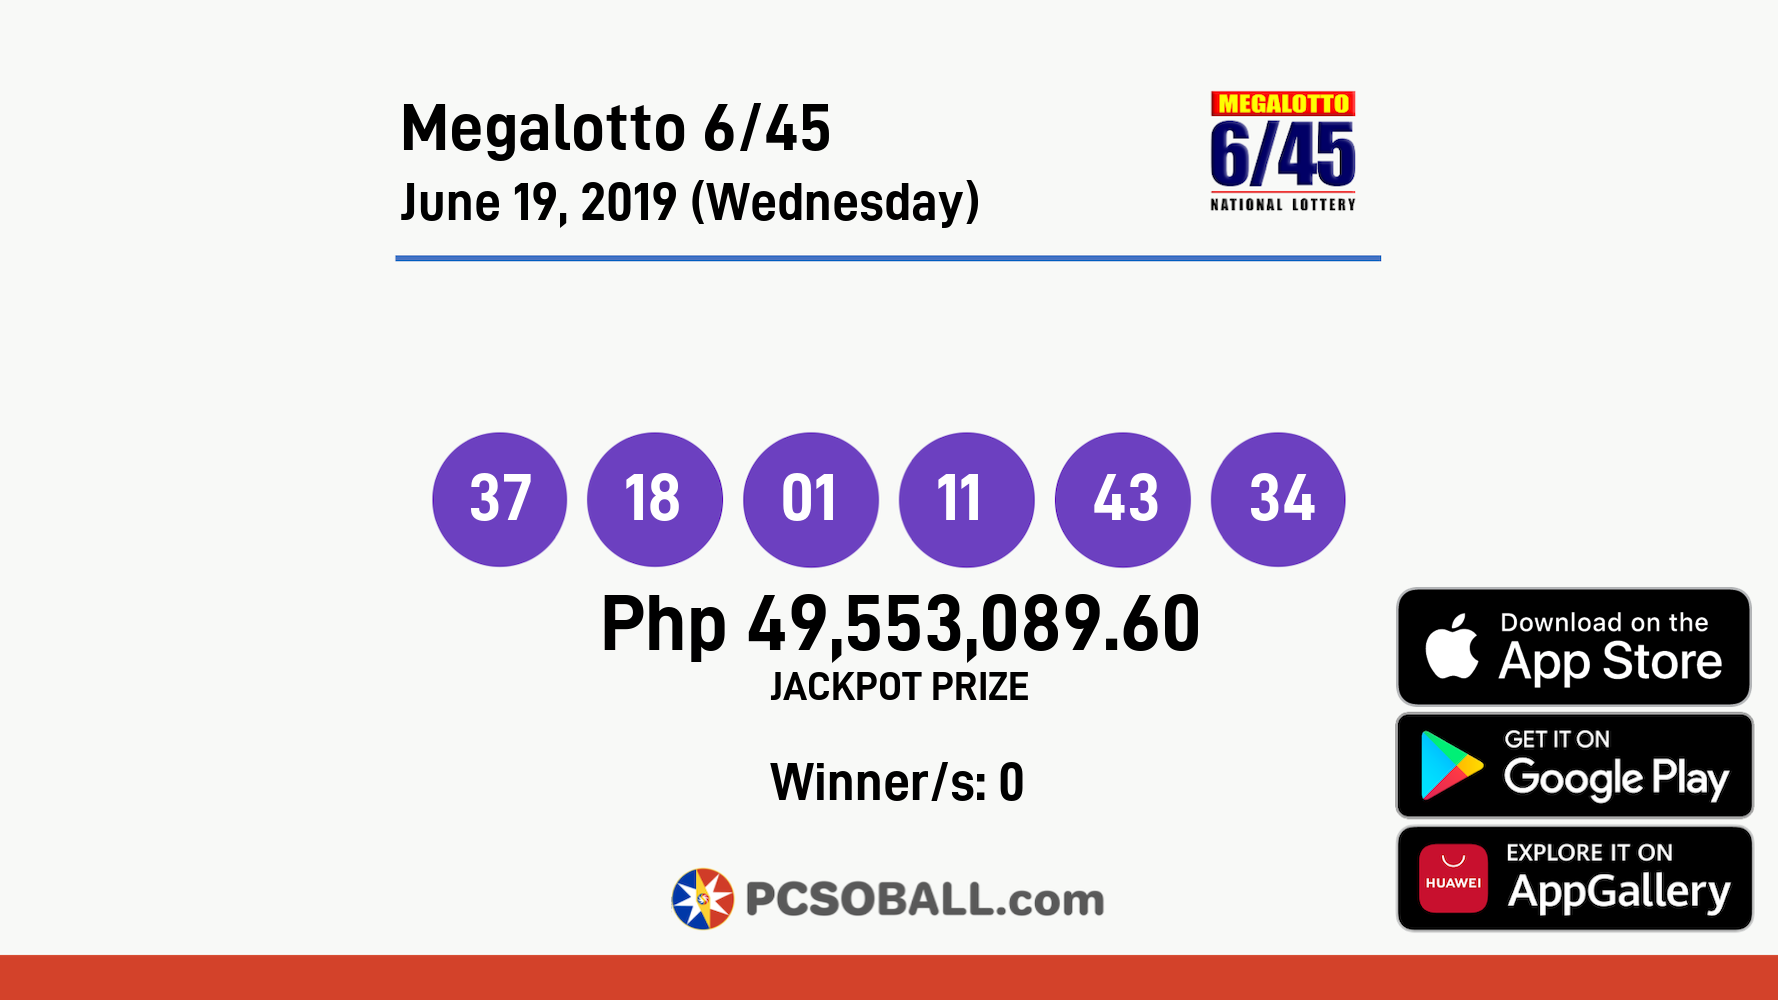 Megalotto 6/45 June 19, 2019 (Wednesday) Result